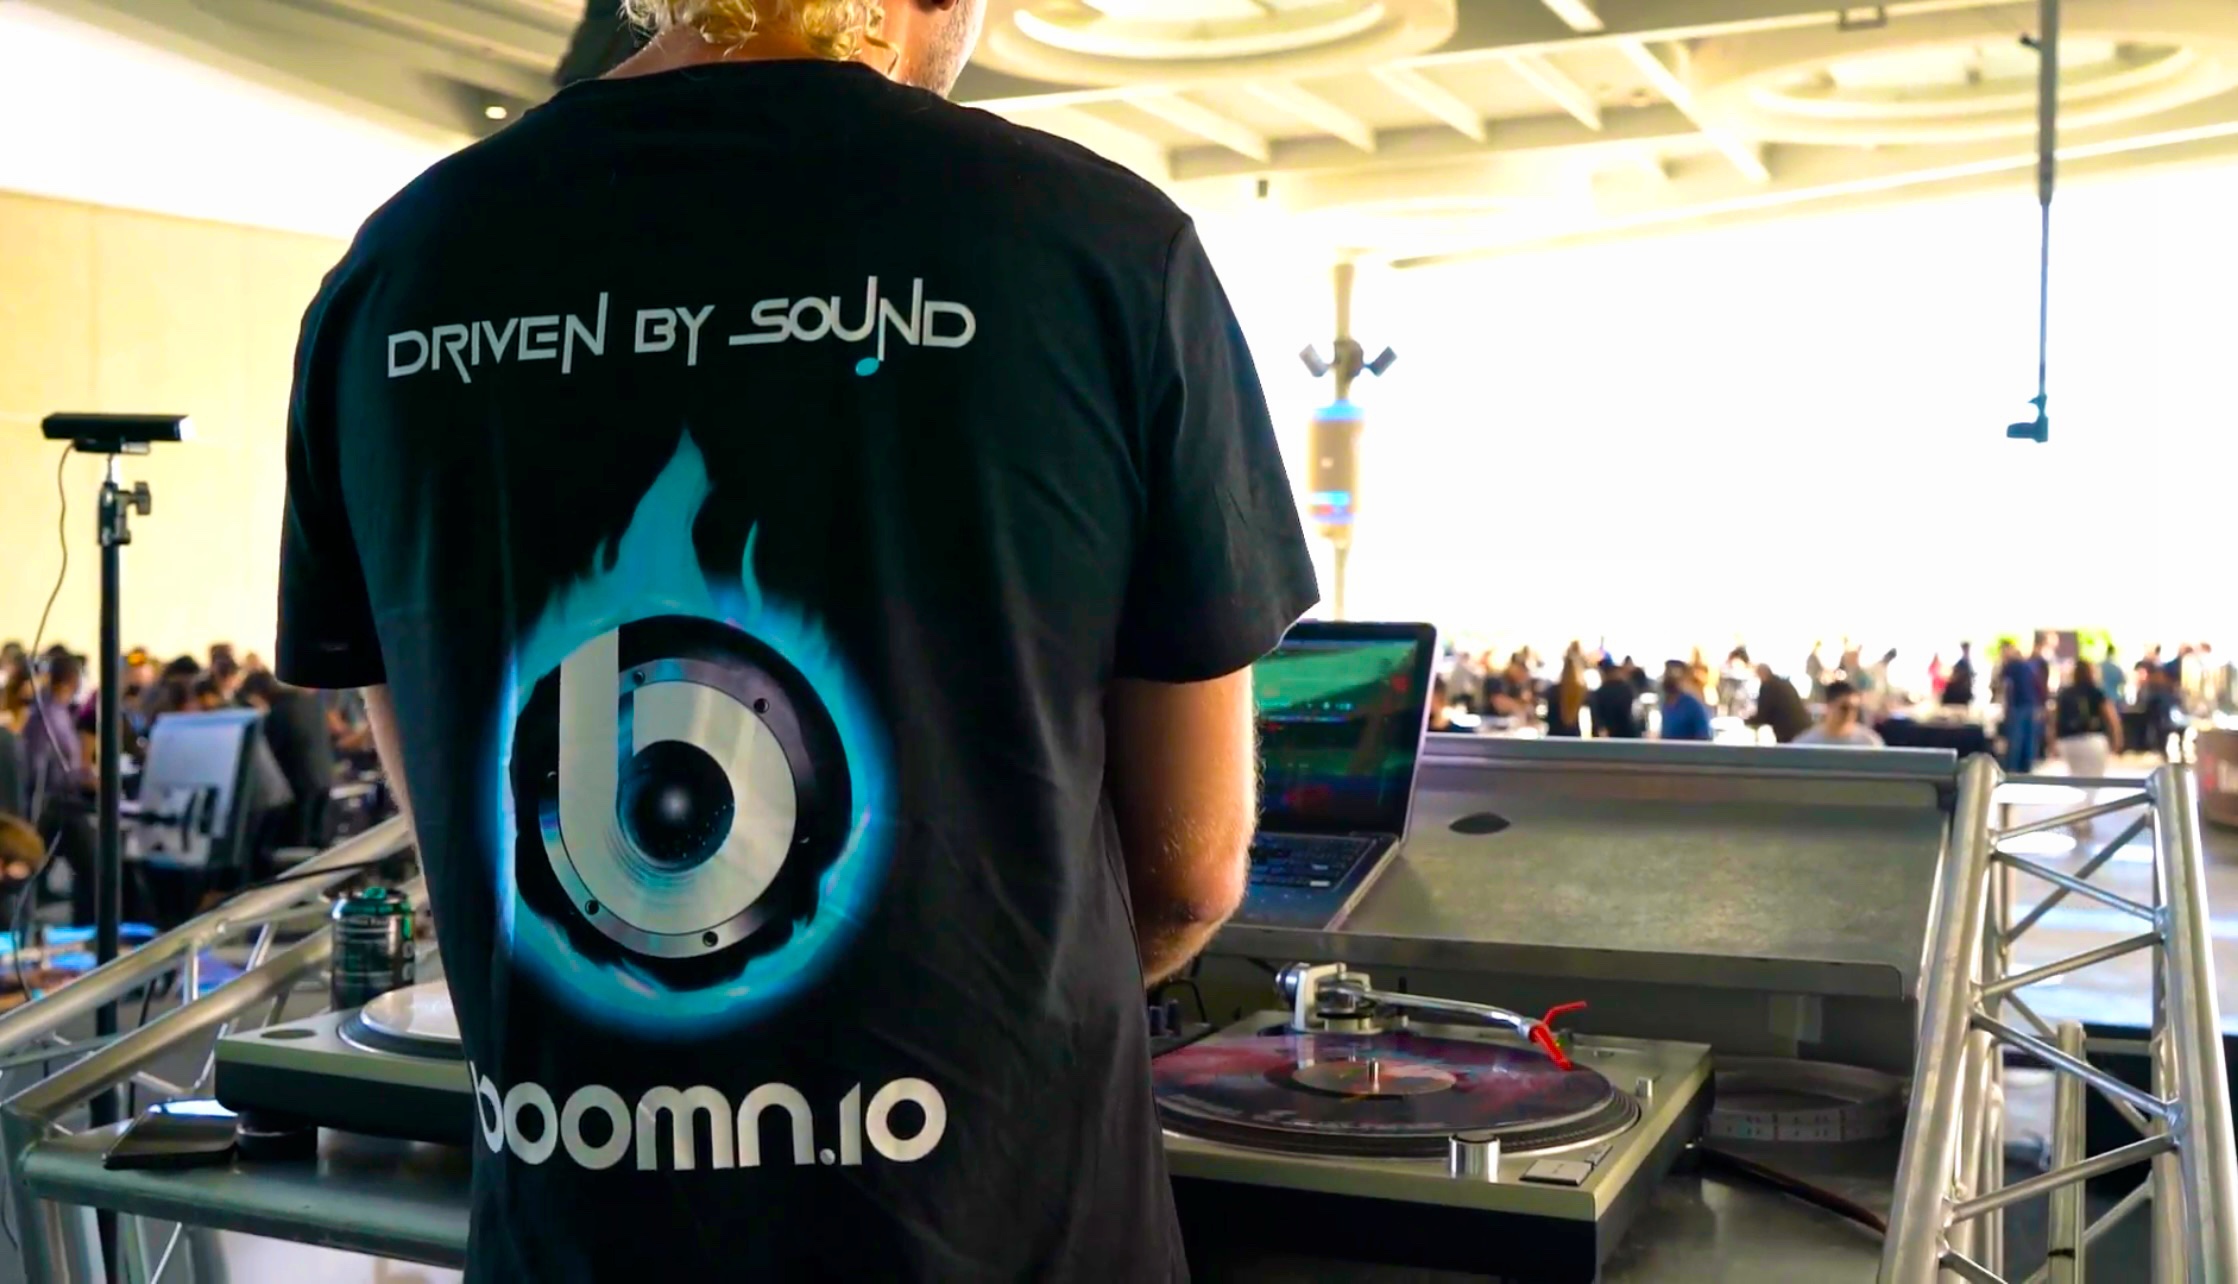 BOOMN's 'Proof Of Sound' App Blasted Into Crypto Space At NFT BZL in Miami, FL